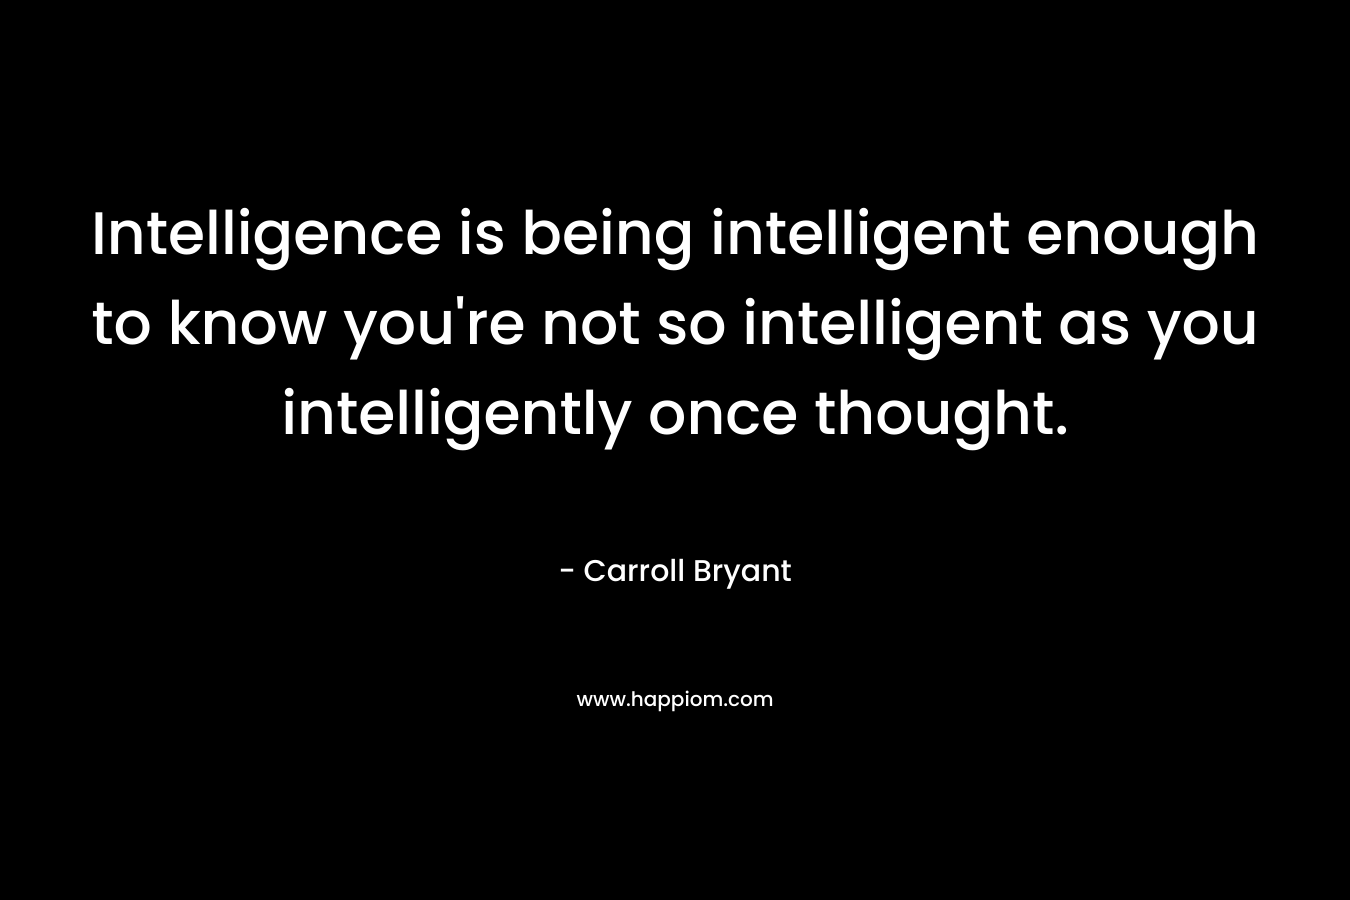 Intelligence is being intelligent enough to know you’re not so intelligent as you intelligently once thought. – Carroll Bryant